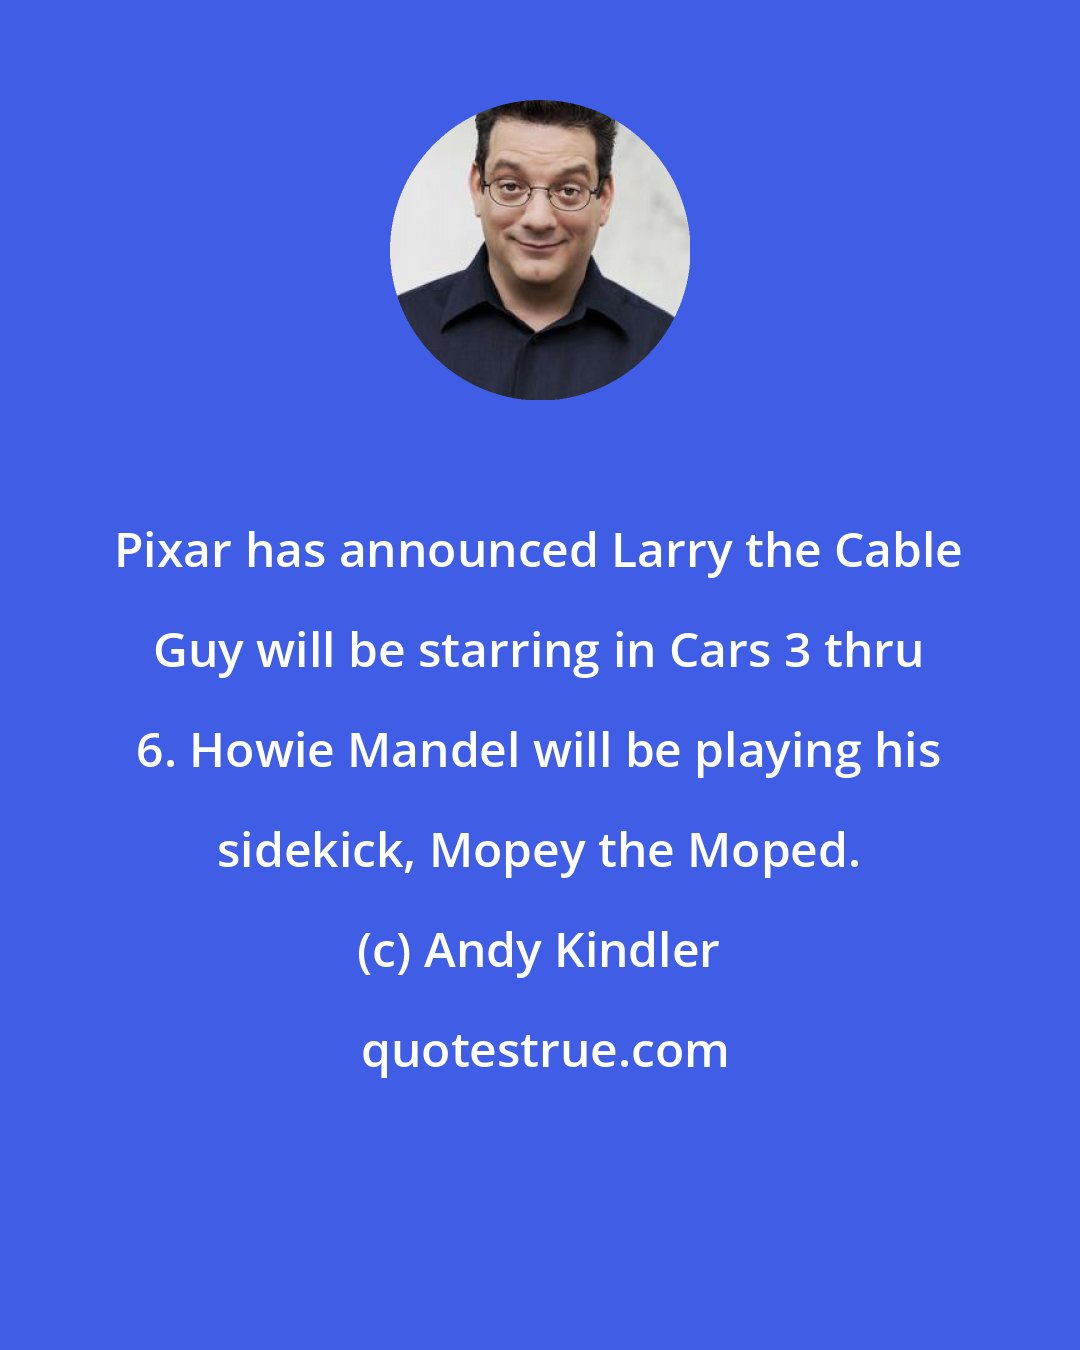 Andy Kindler: Pixar has announced Larry the Cable Guy will be starring in Cars 3 thru 6. Howie Mandel will be playing his sidekick, Mopey the Moped.